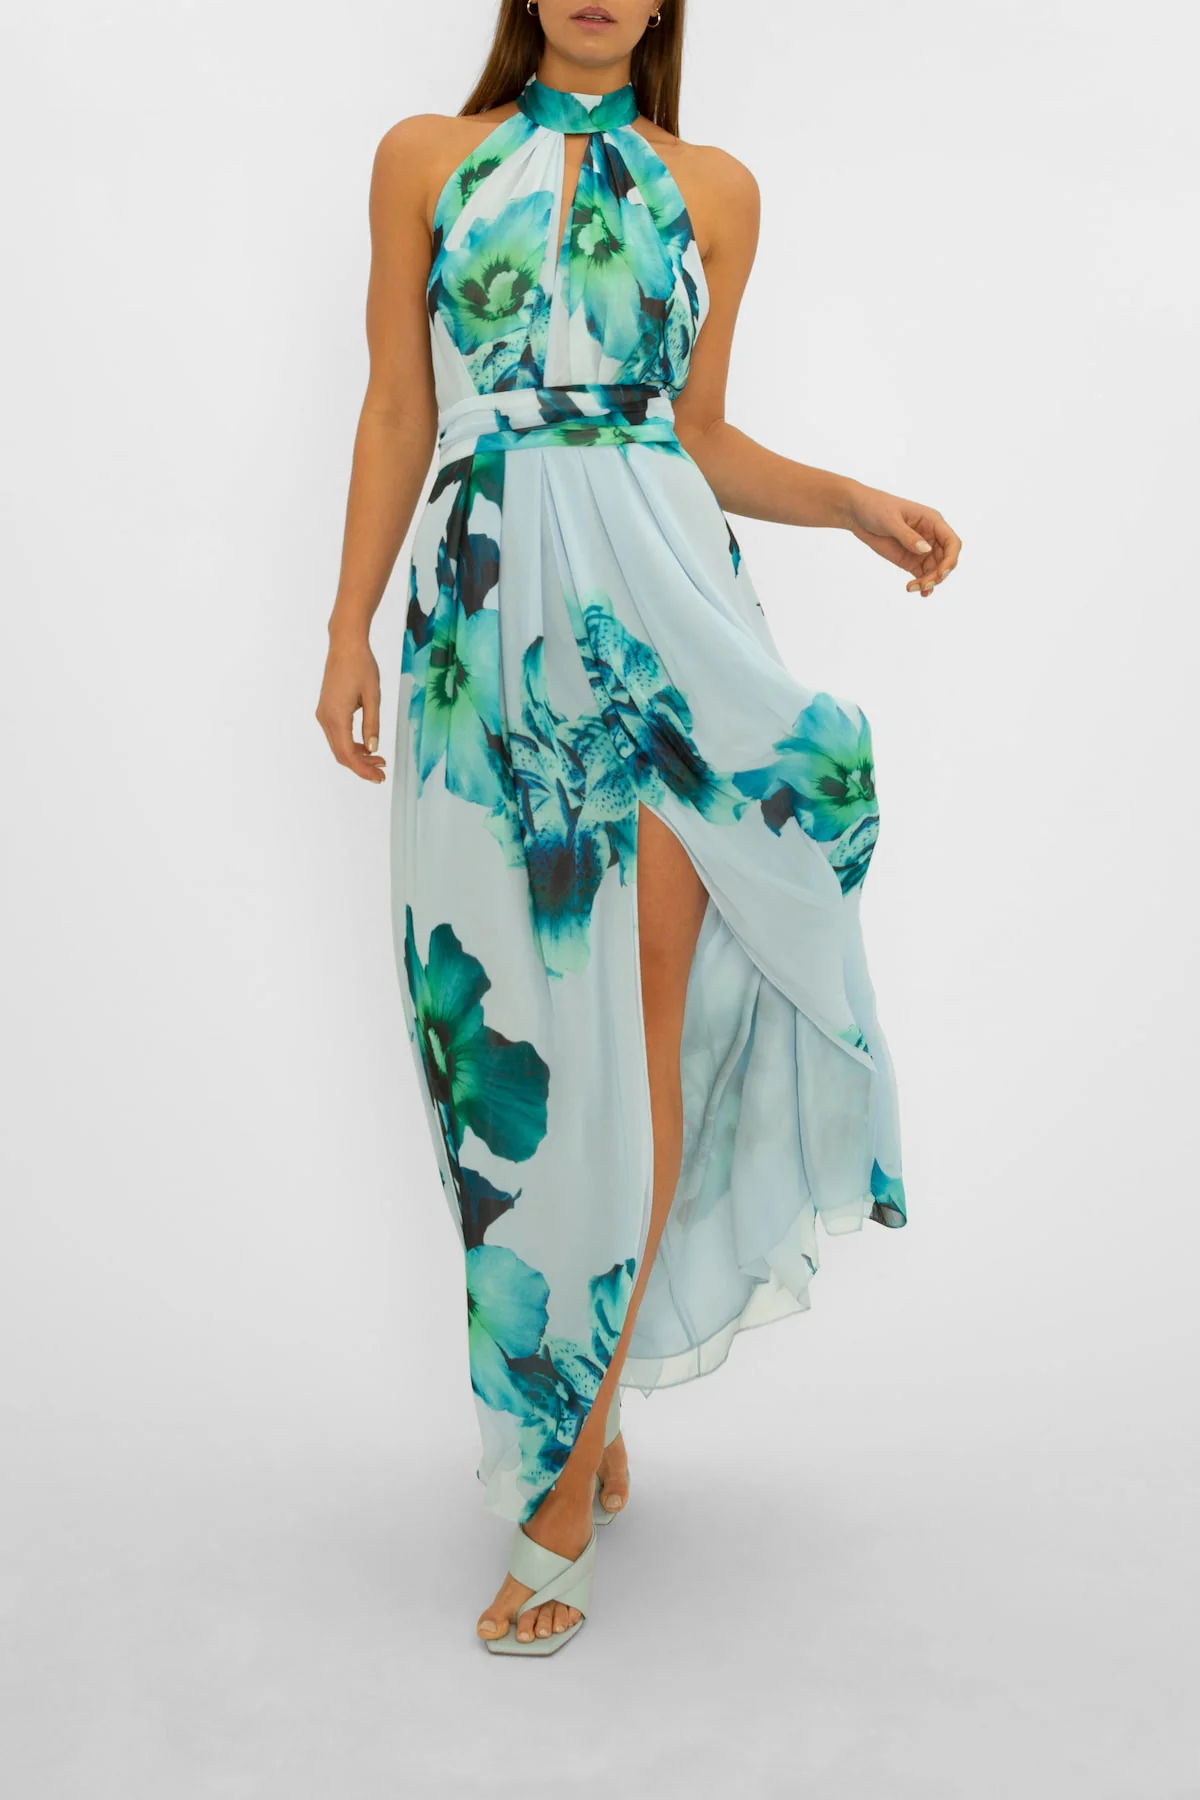 Style Hire by Sarah-blue-mid-summer-nights-dream-gown 1600x@2x